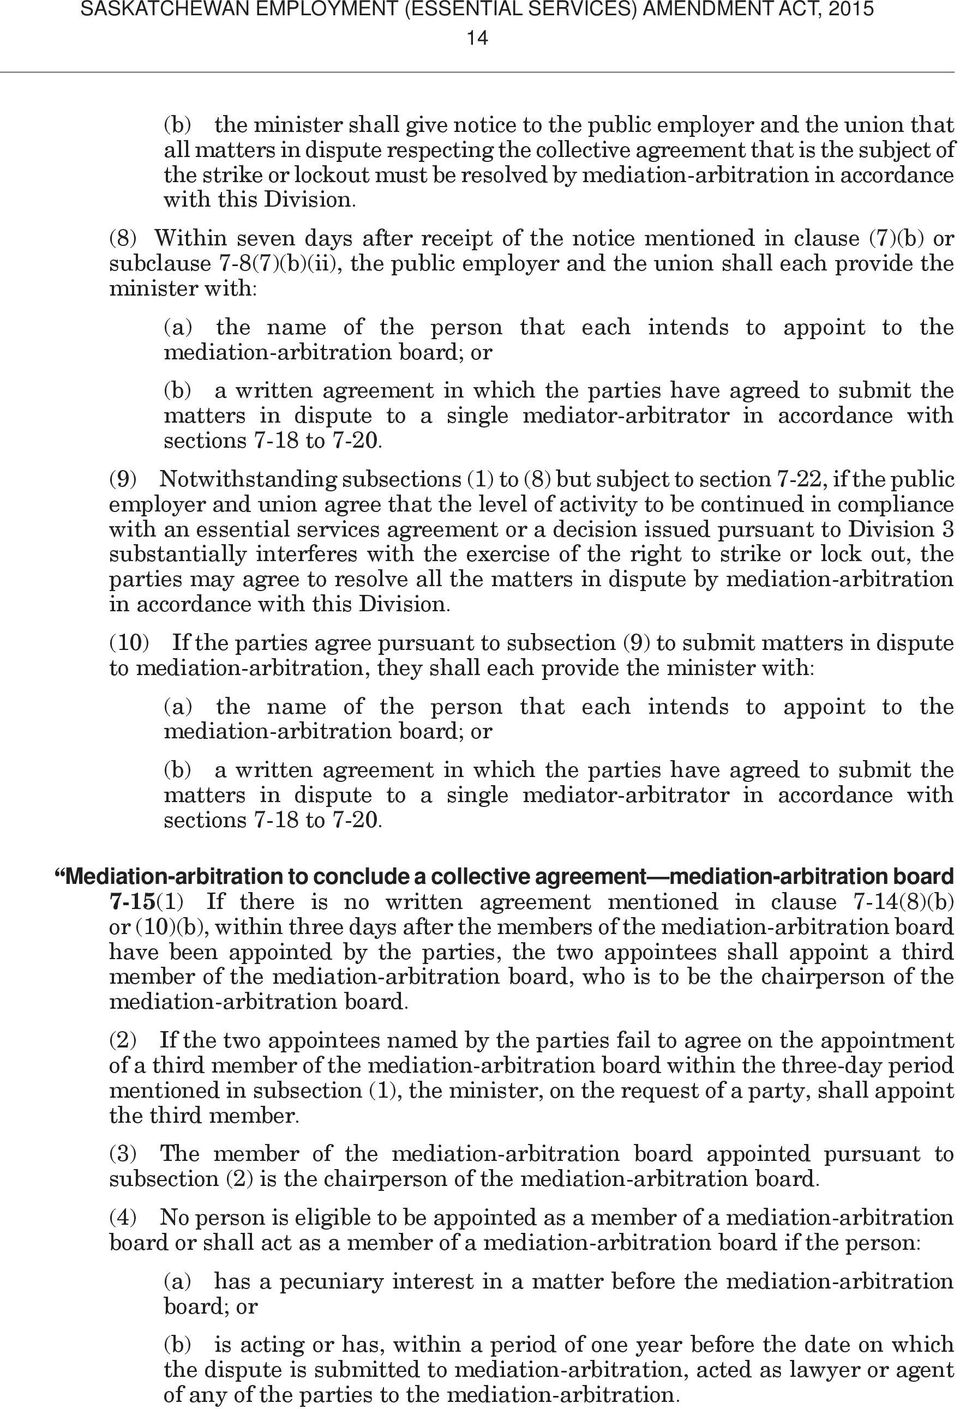 (8) Within seven days after receipt of the notice mentioned in clause (7)(b) or subclause 7-8(7)(b)(ii), the public employer and the union shall each provide the minister with: (a) the name of the